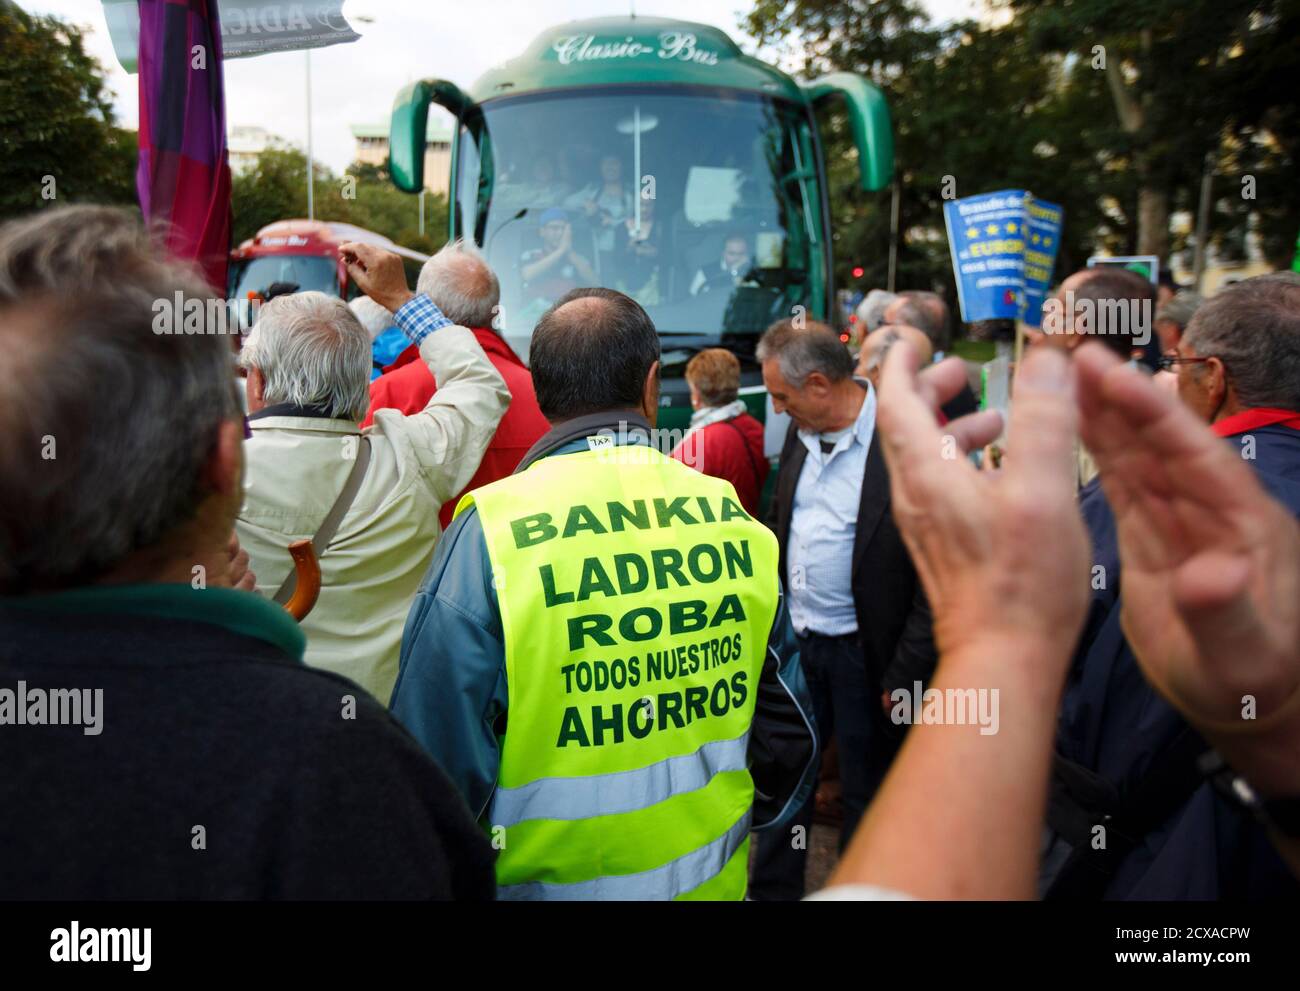 Holders of preference shares block traffic at Paseo de Recoletos during a  protest outside High Court in Madrid October 16, 2014. Spanish authorities  are investigating dozens of former executives and board members